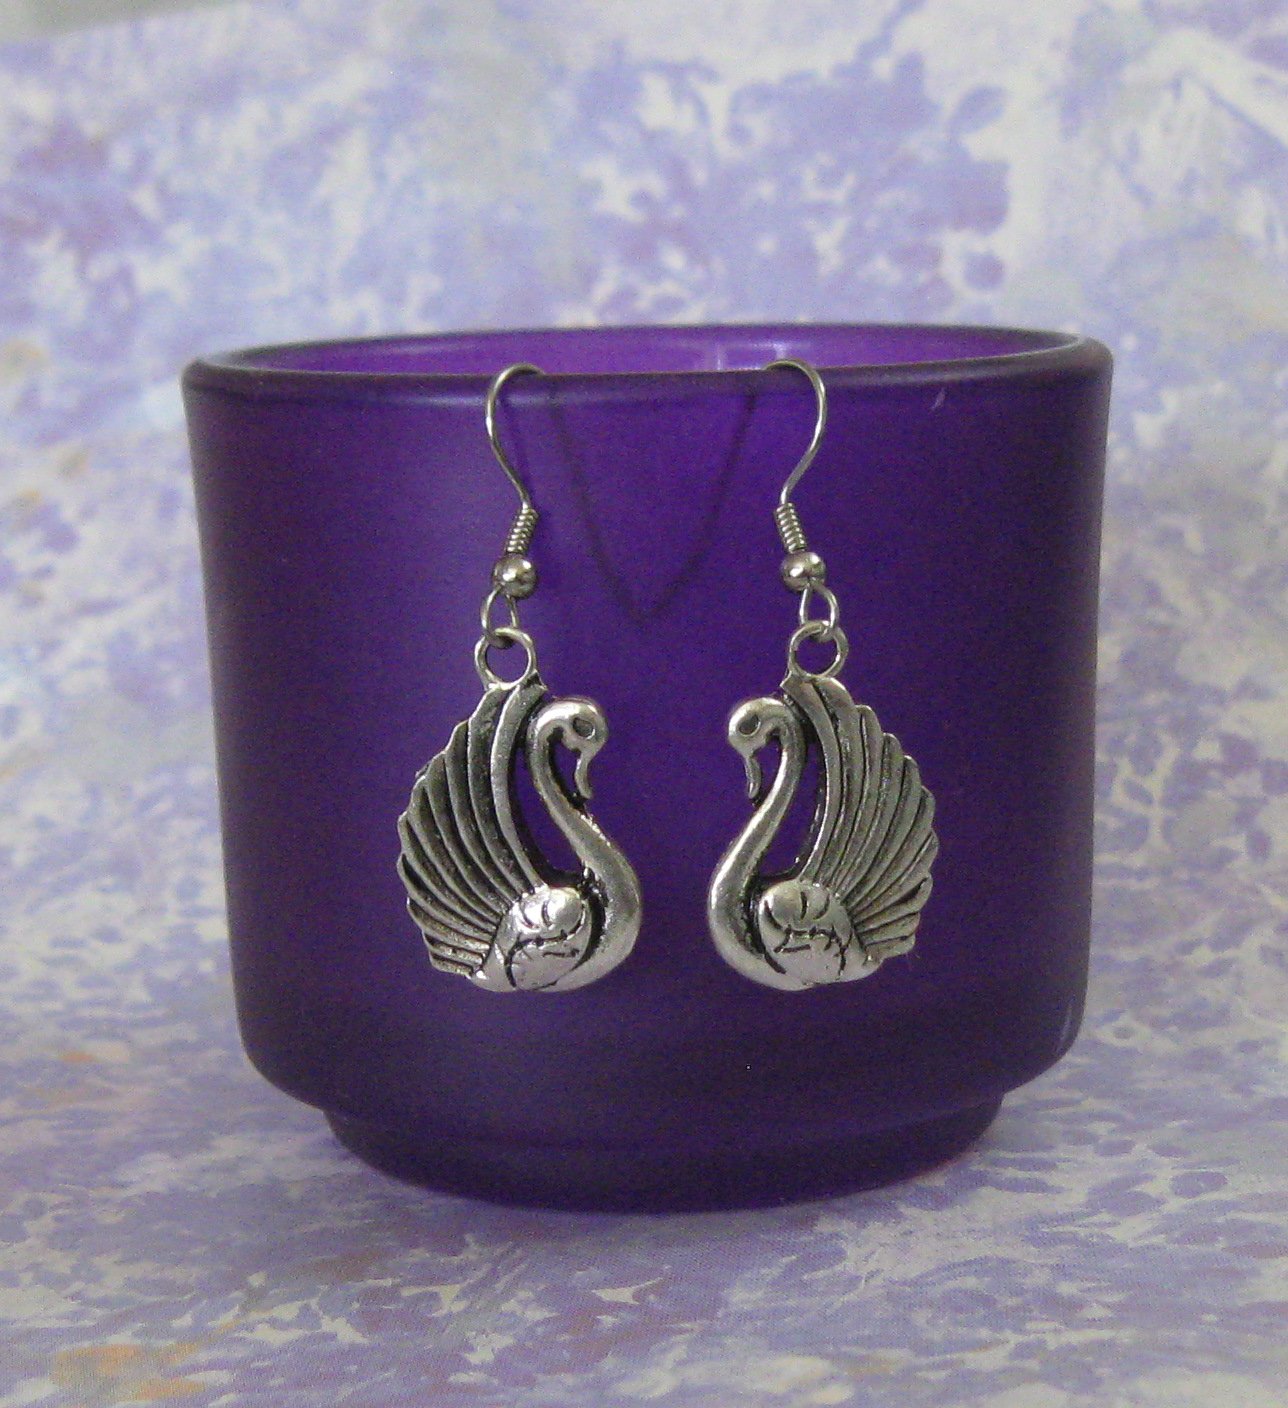 Swan Charm Dangle Drop Earrings, Siliver Plated with Pierced Hooks, Leverbacks or Clip Ons